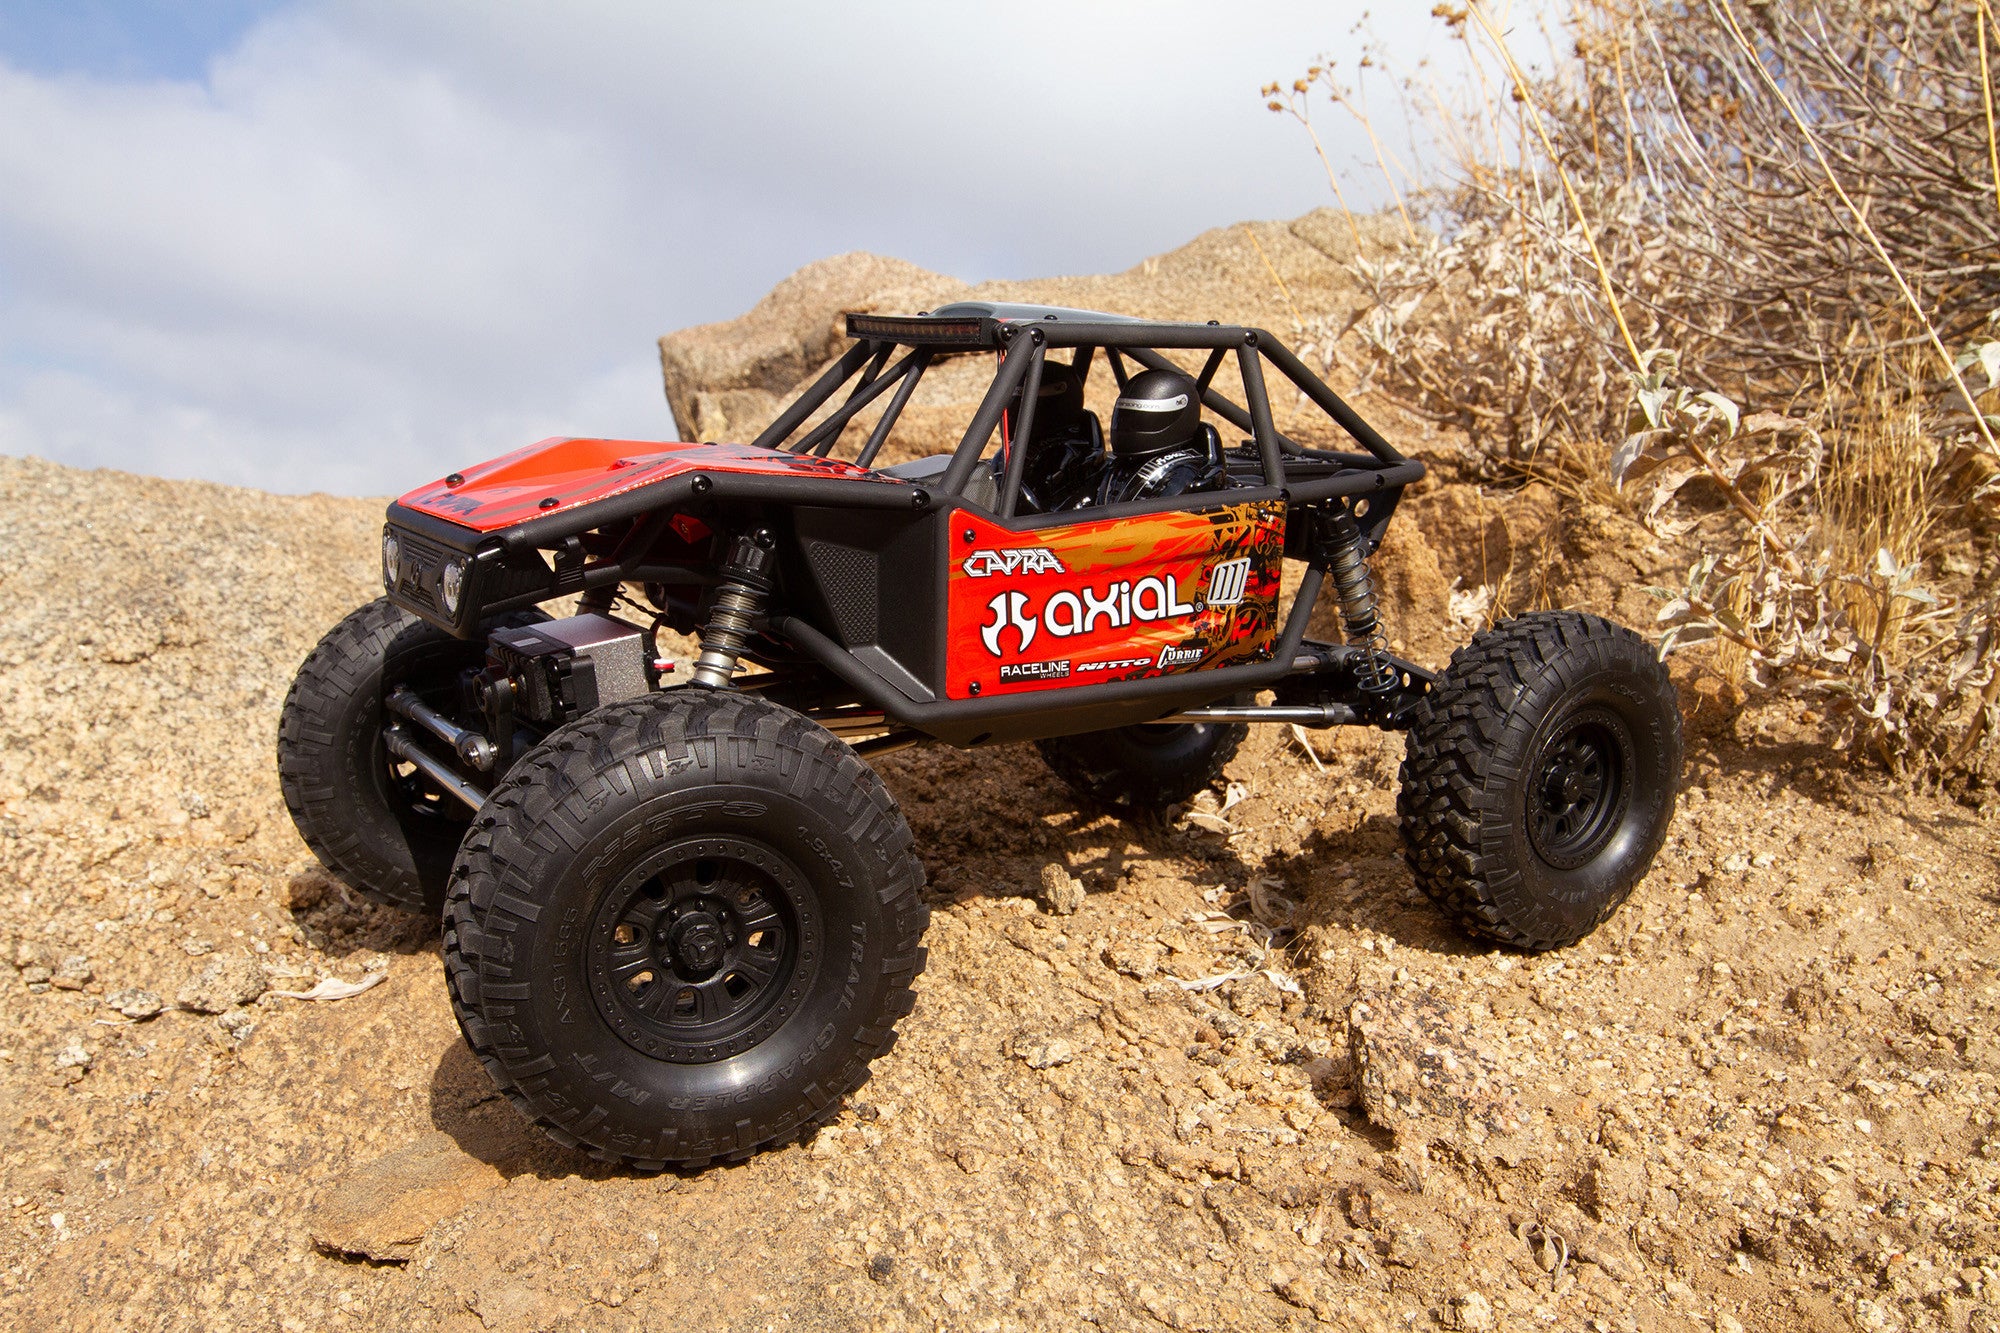 Axial Capra 1.9 Unlimited Trail Buggy RTR AXI03000